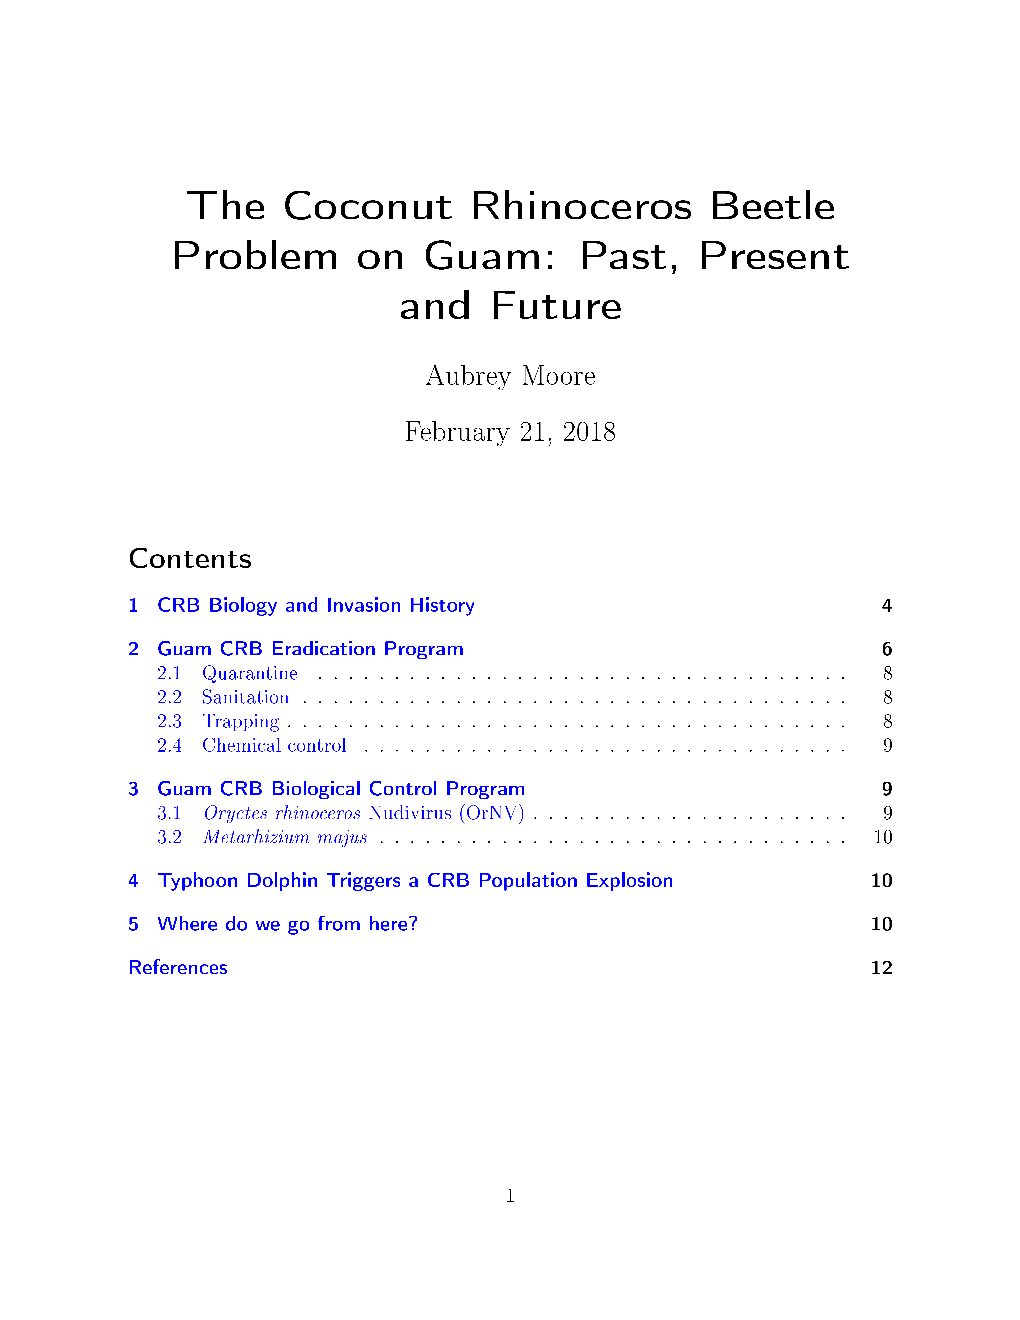 The Coconut Rhinoceros Beetle Problem on Guam: Past, Present and Future